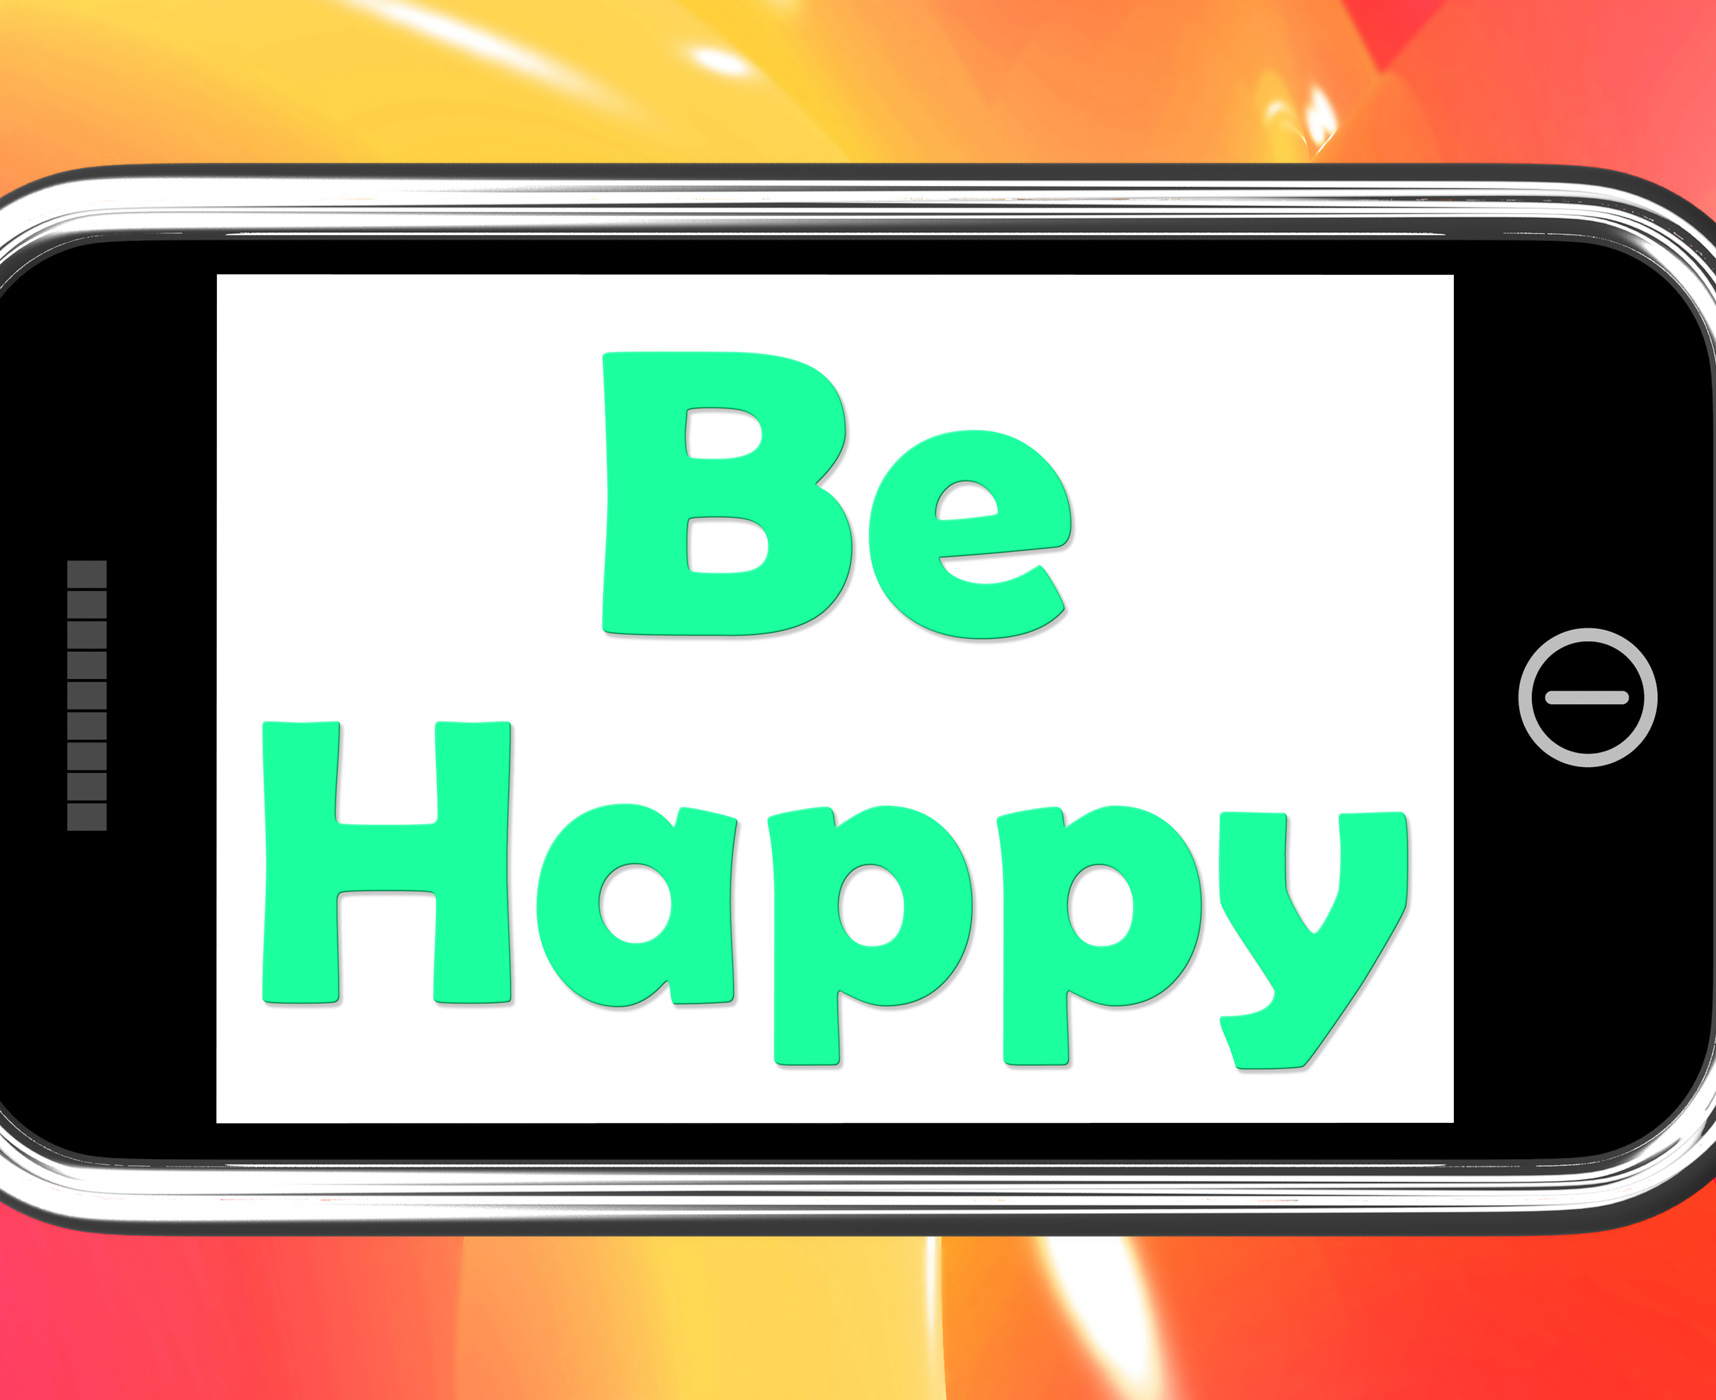 Be happy on phone shows cheerful happiness photo